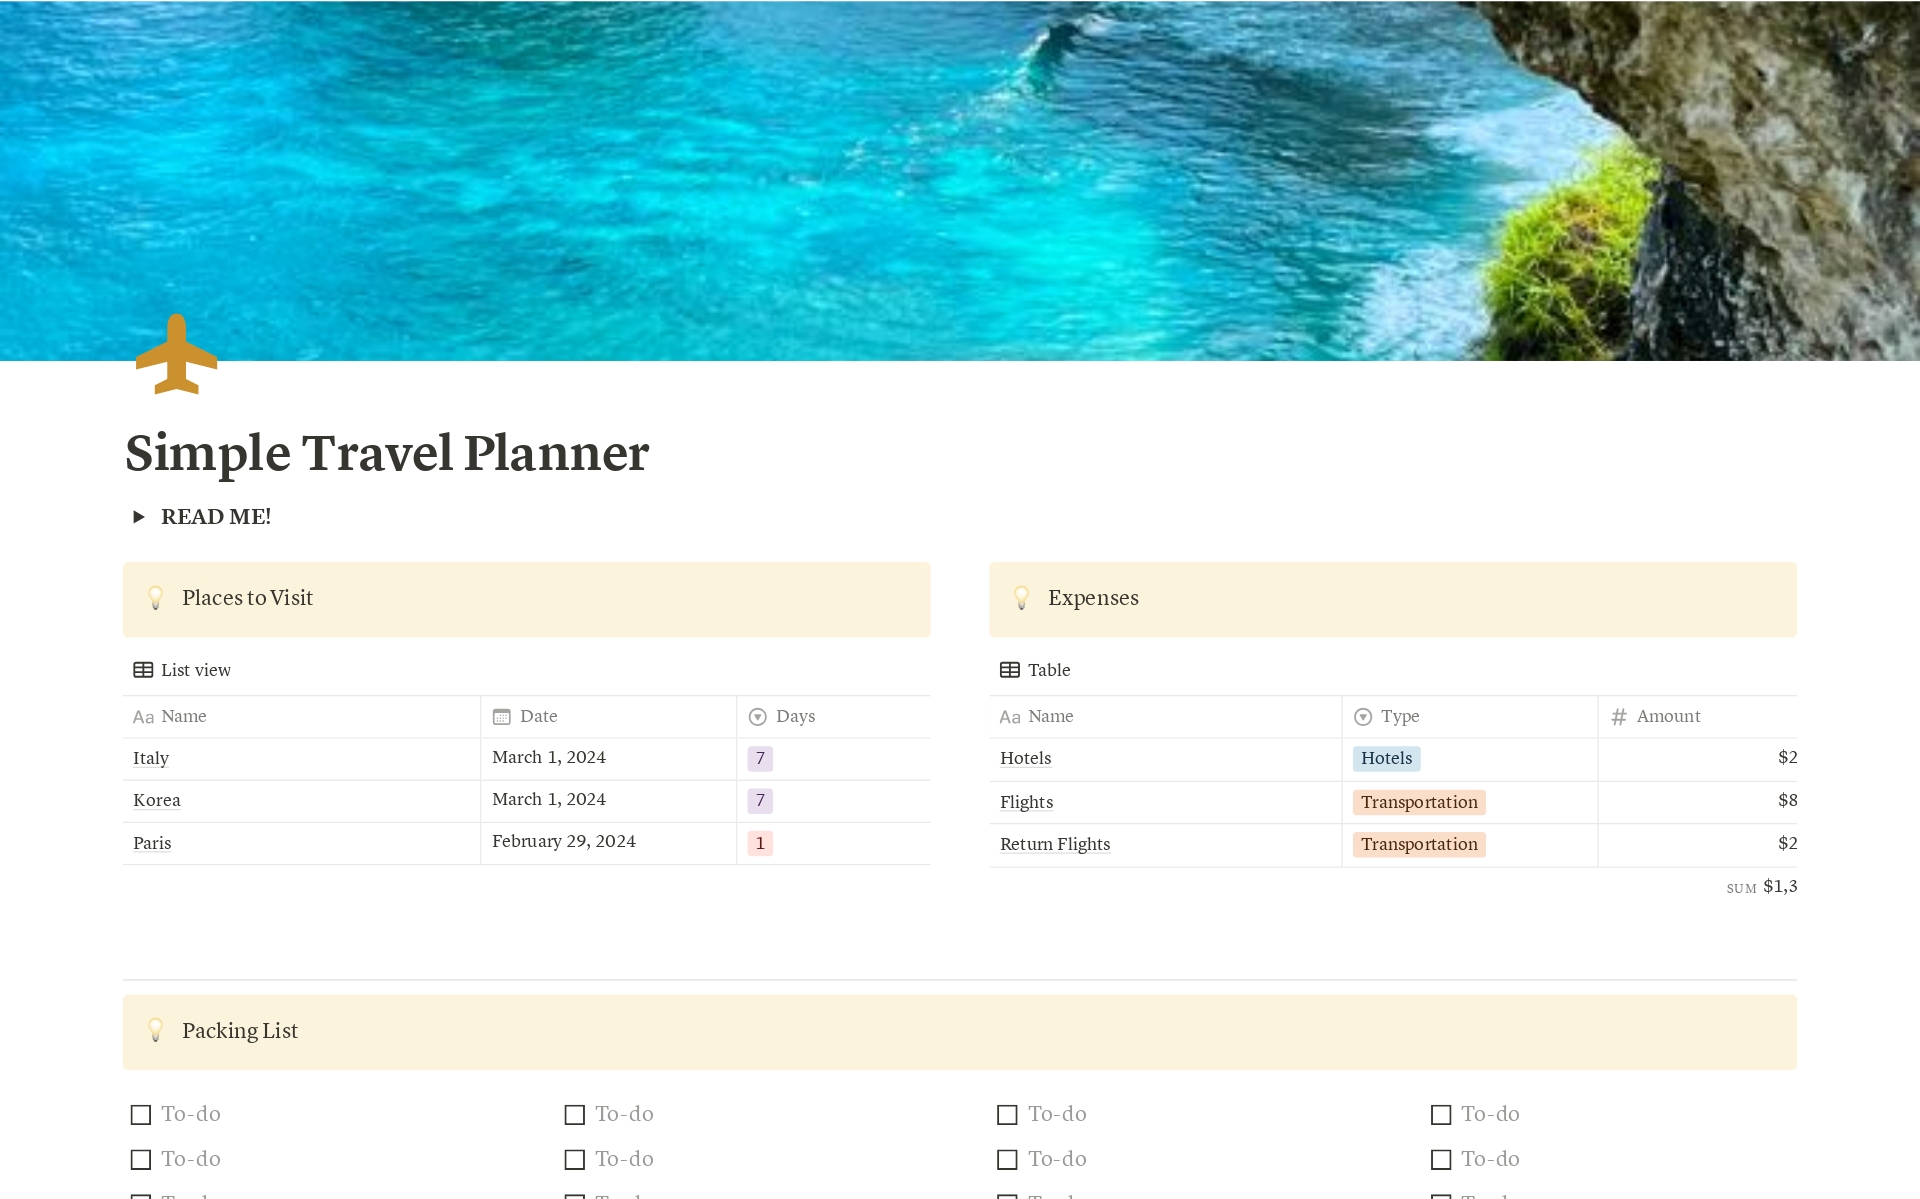 A simple Travel Planner!